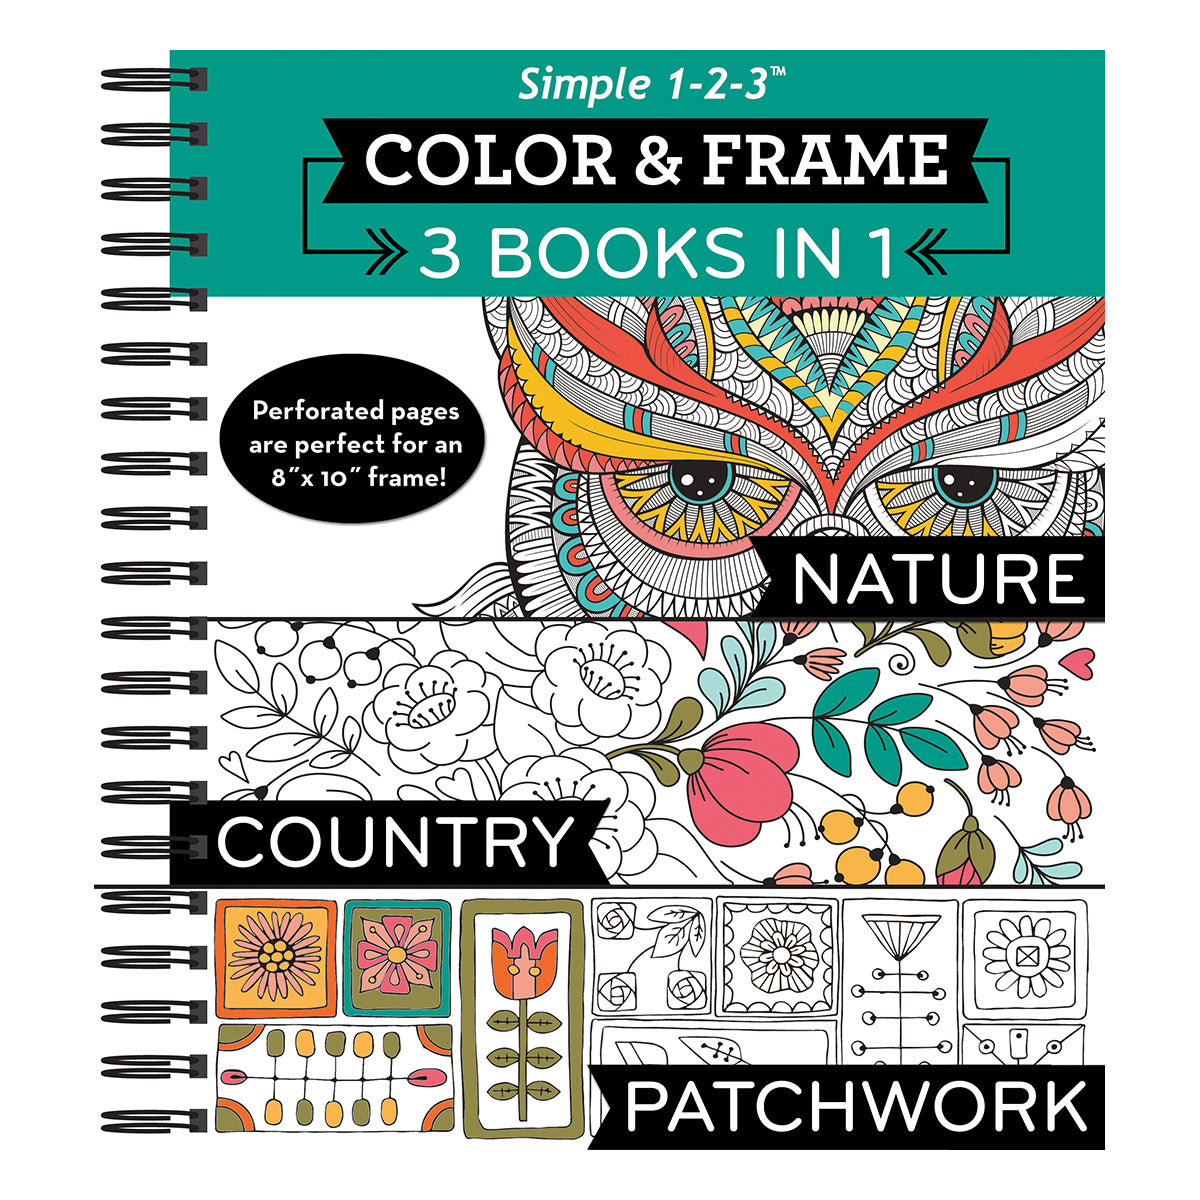 Color & Frame  3 Books in 1  Nature Country Patchwork Adult Coloring Book